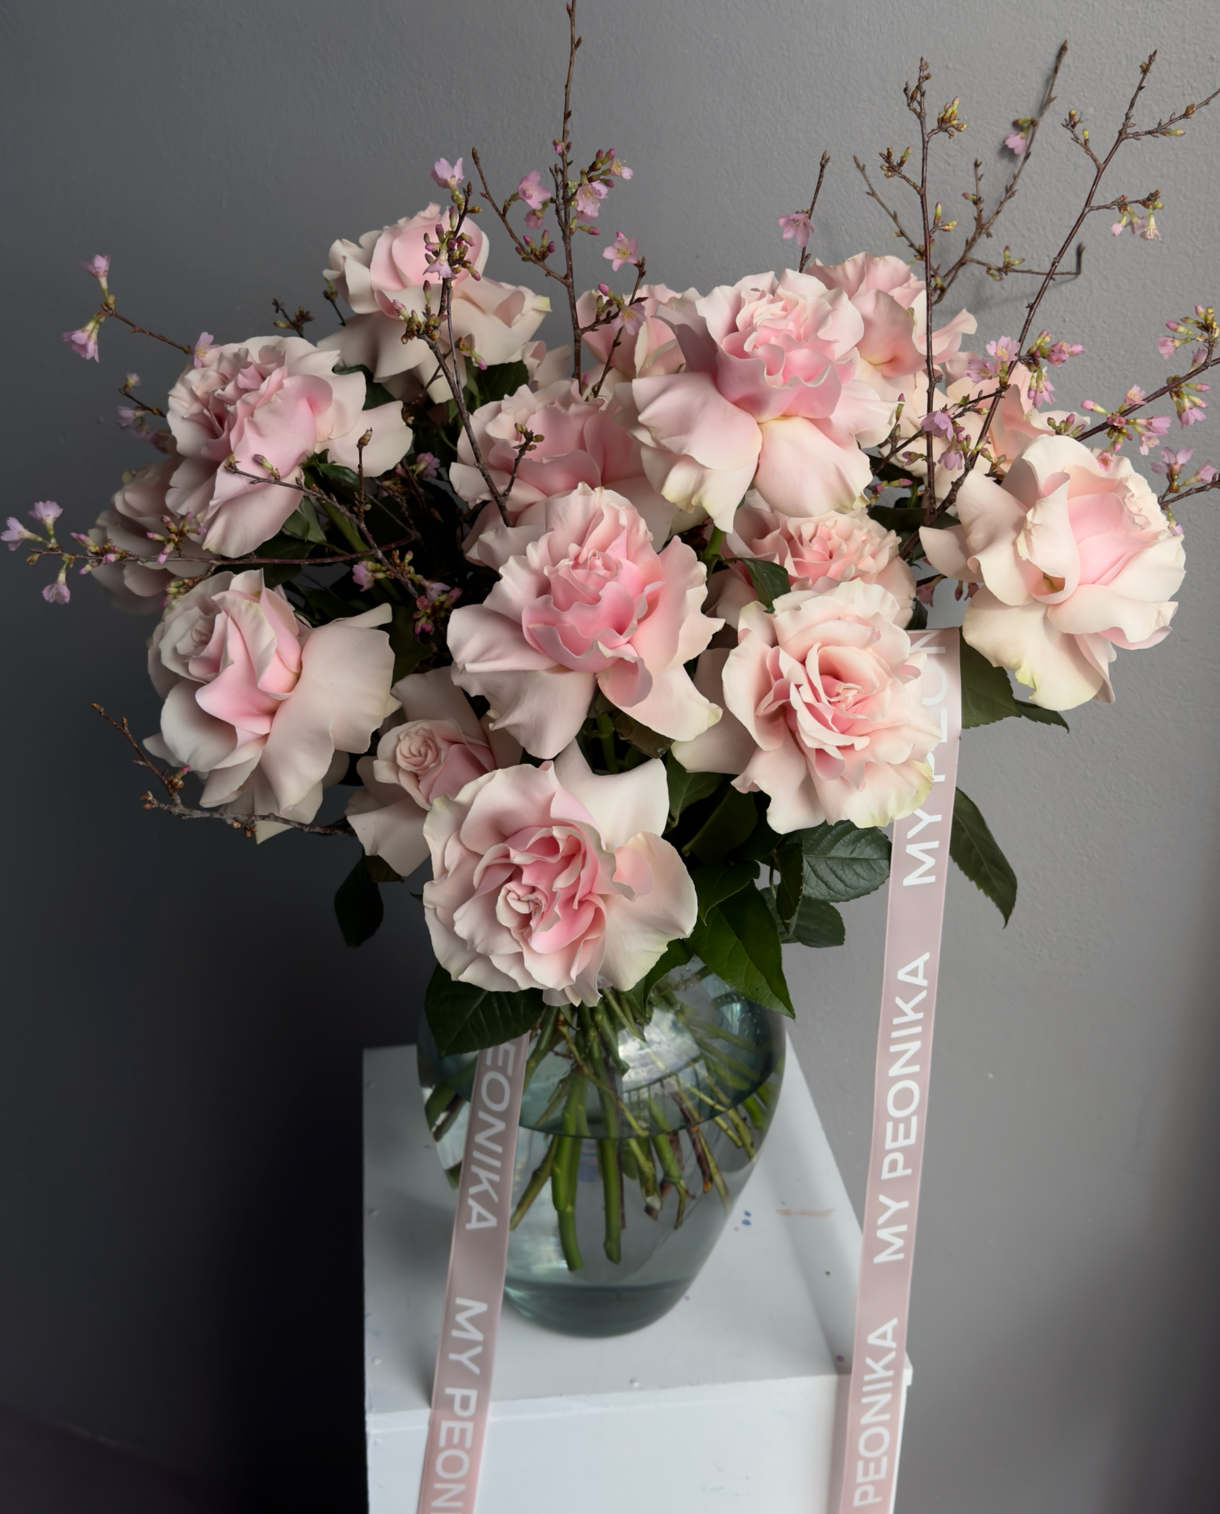 Bouquet in a vase “Lady Mary” - french roses